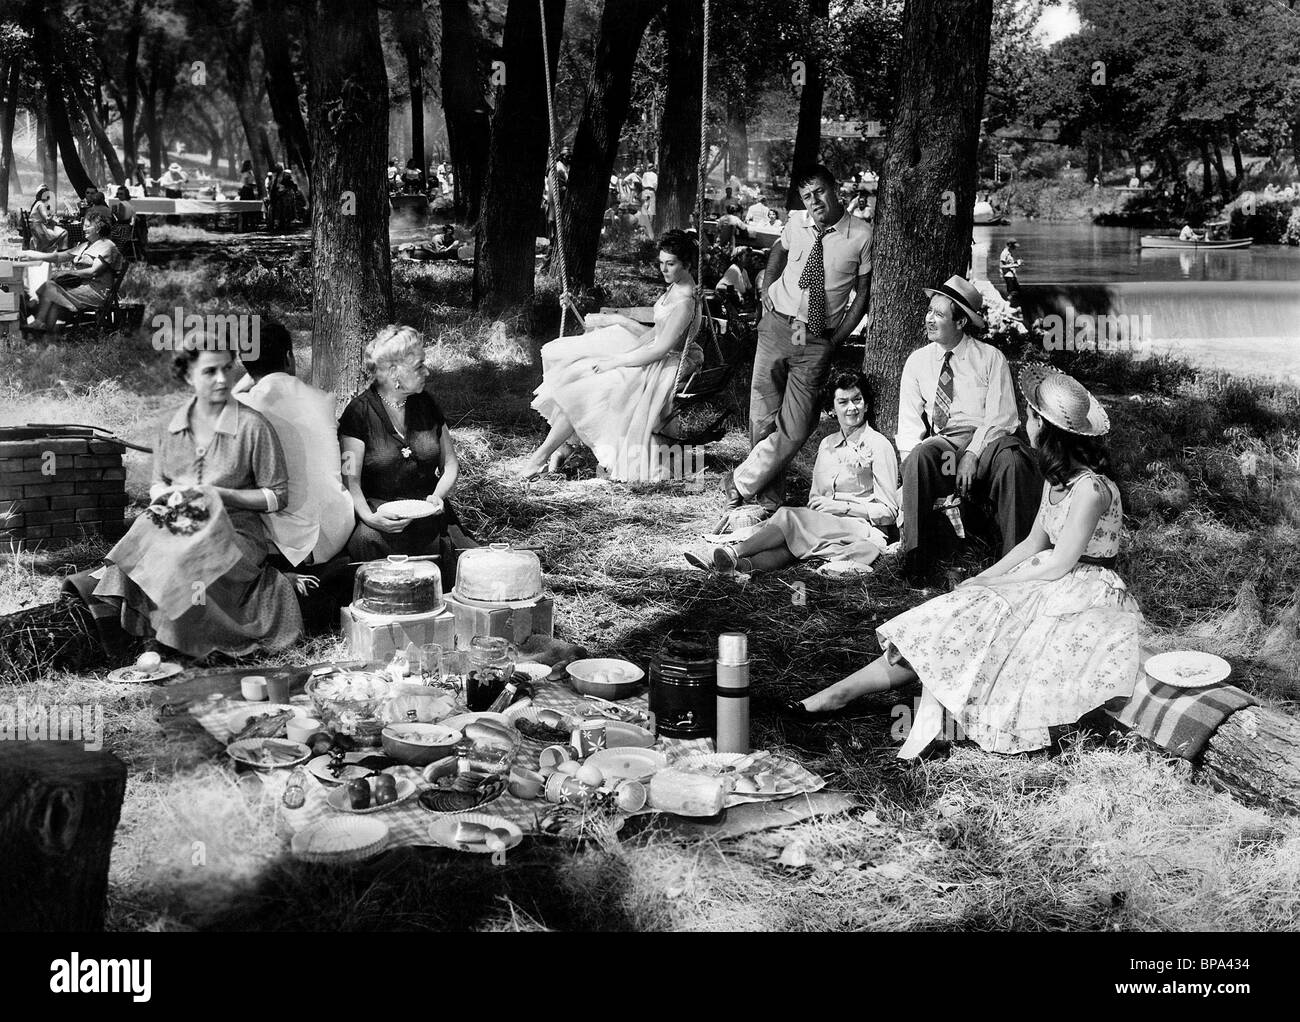 WILLIAM HOLDEN, Rosalind Russell, ARTHUR O'CONNELL, pic-nic, 1955 Foto Stock